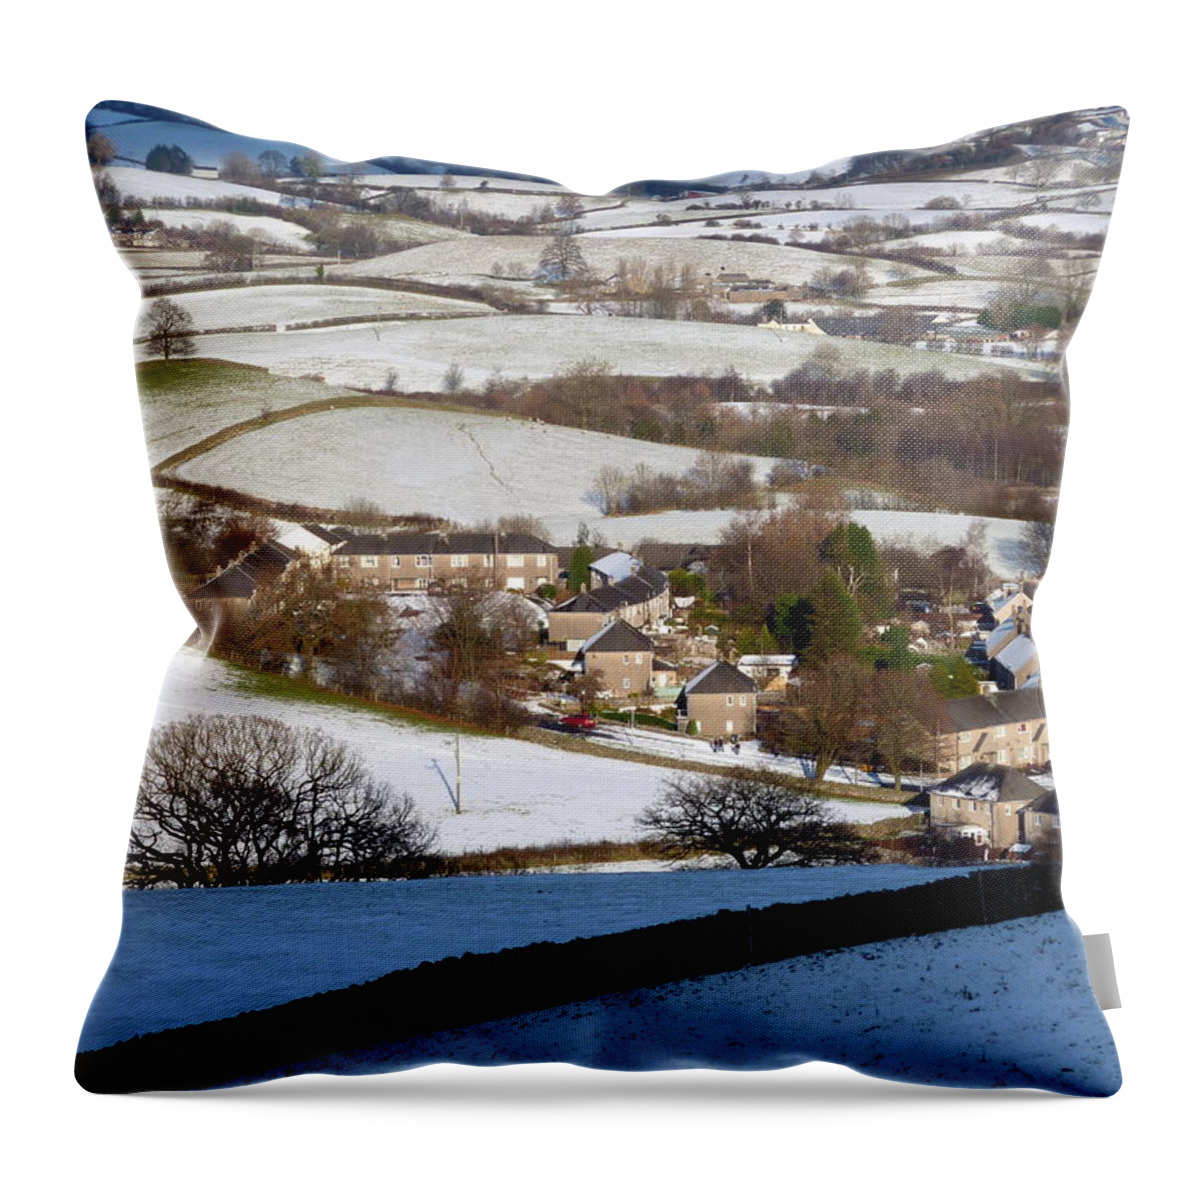 Village Throw Pillow featuring the photograph Winter Village by Lukasz Ryszka